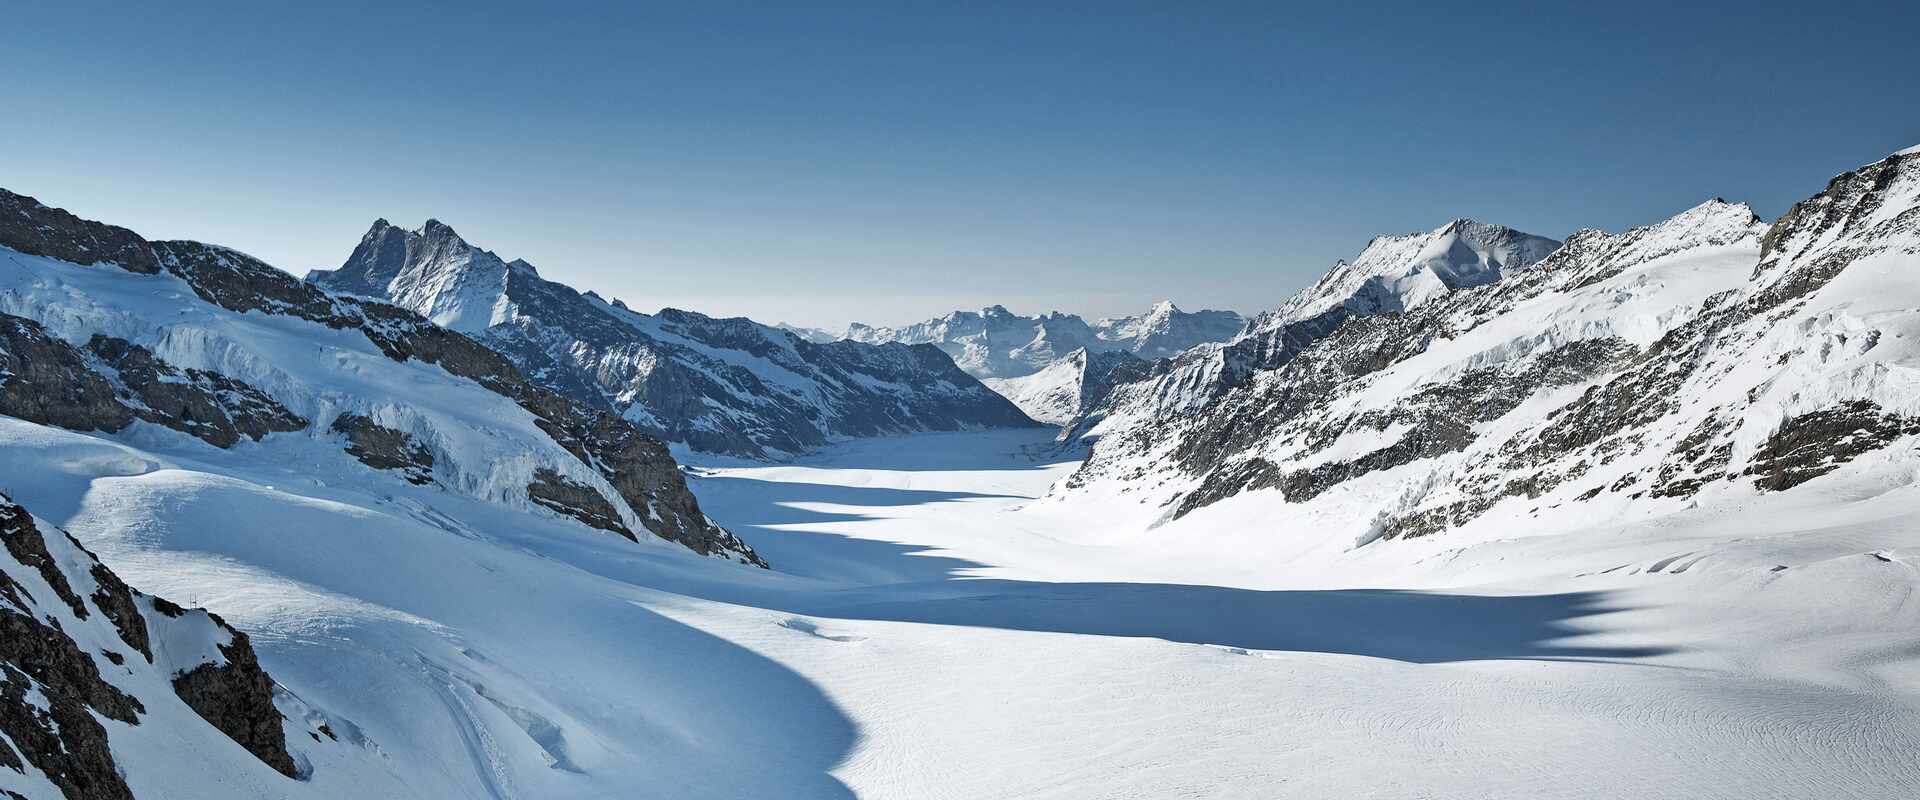 The Aletsch Glacier is the longest at 23 kms in Europe